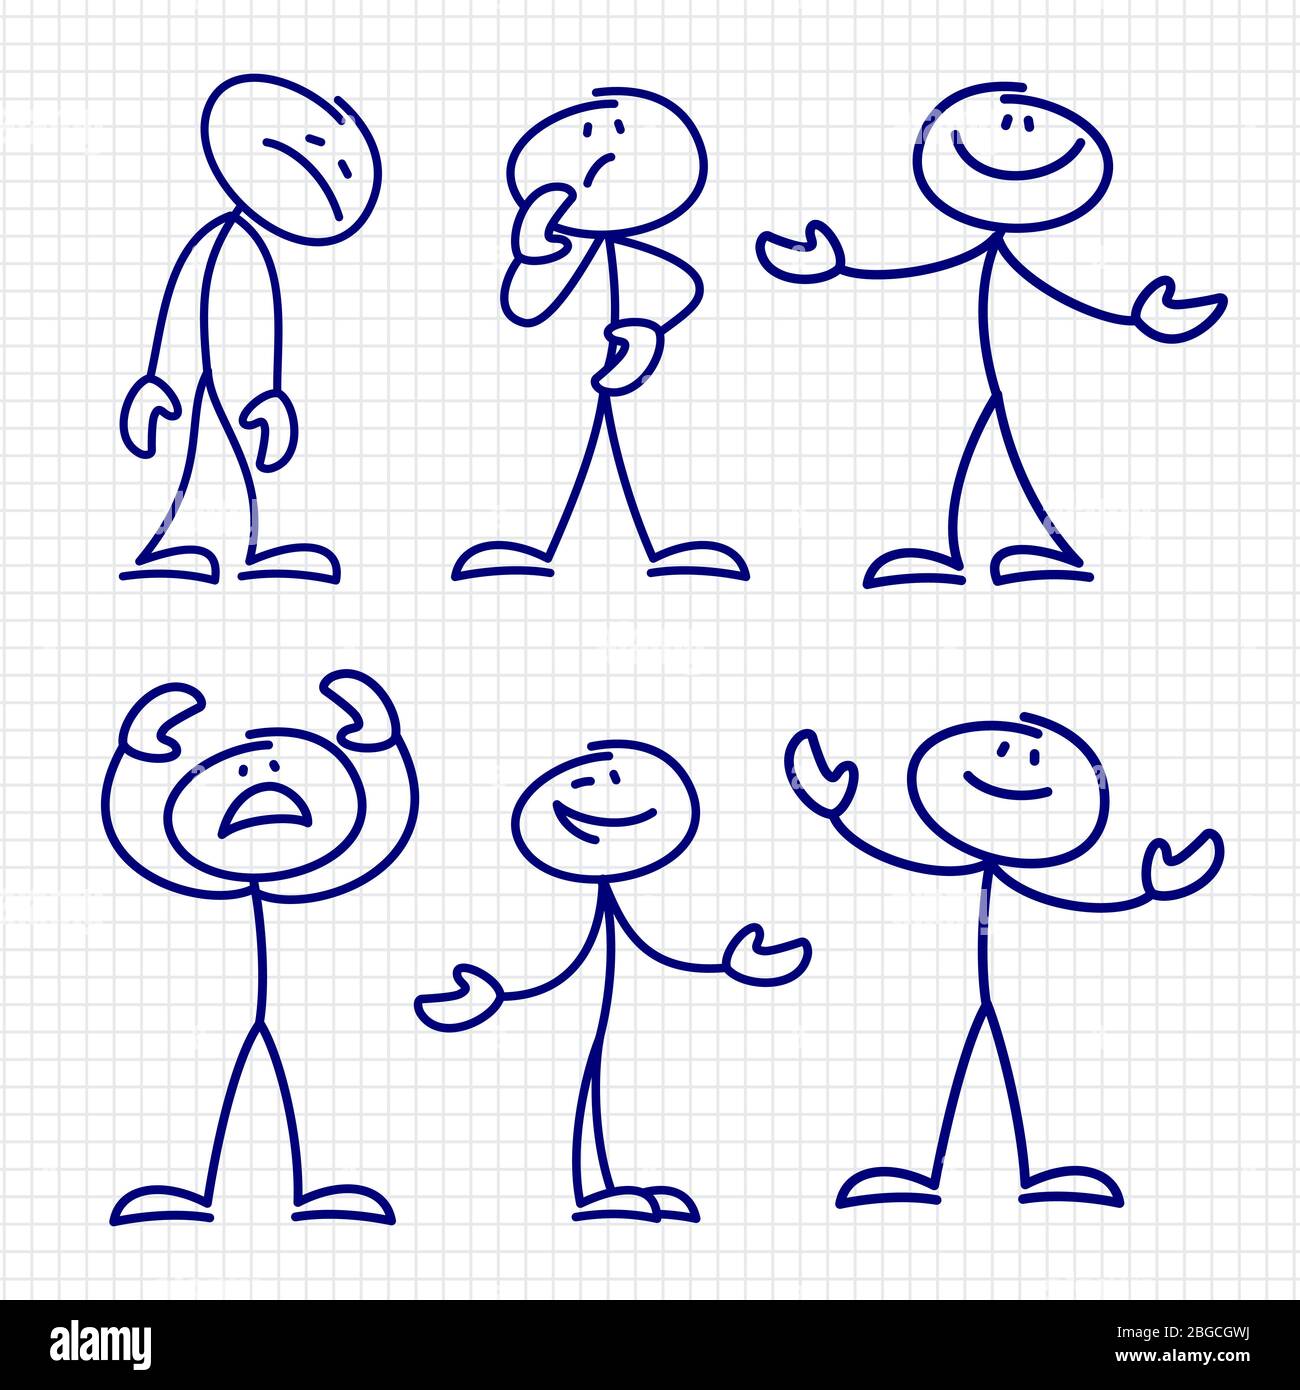 Why Learn How to Draw Stick Figures  Stick figure drawing, Drawing people, Stick  drawings